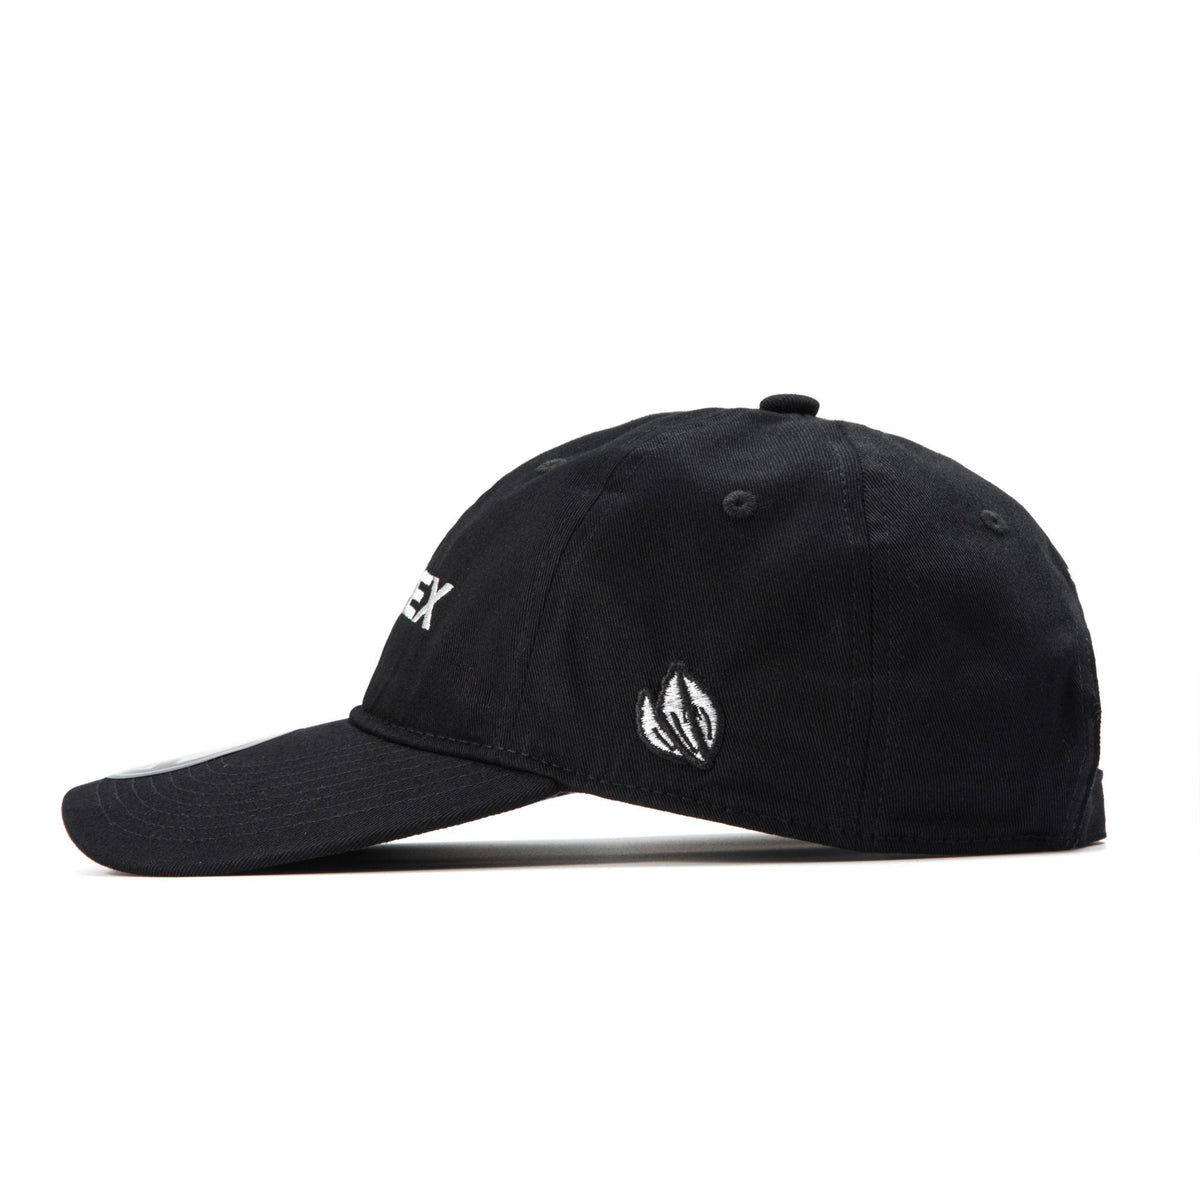 AlphaRex Embroidered Baseball Cap with Black Claw